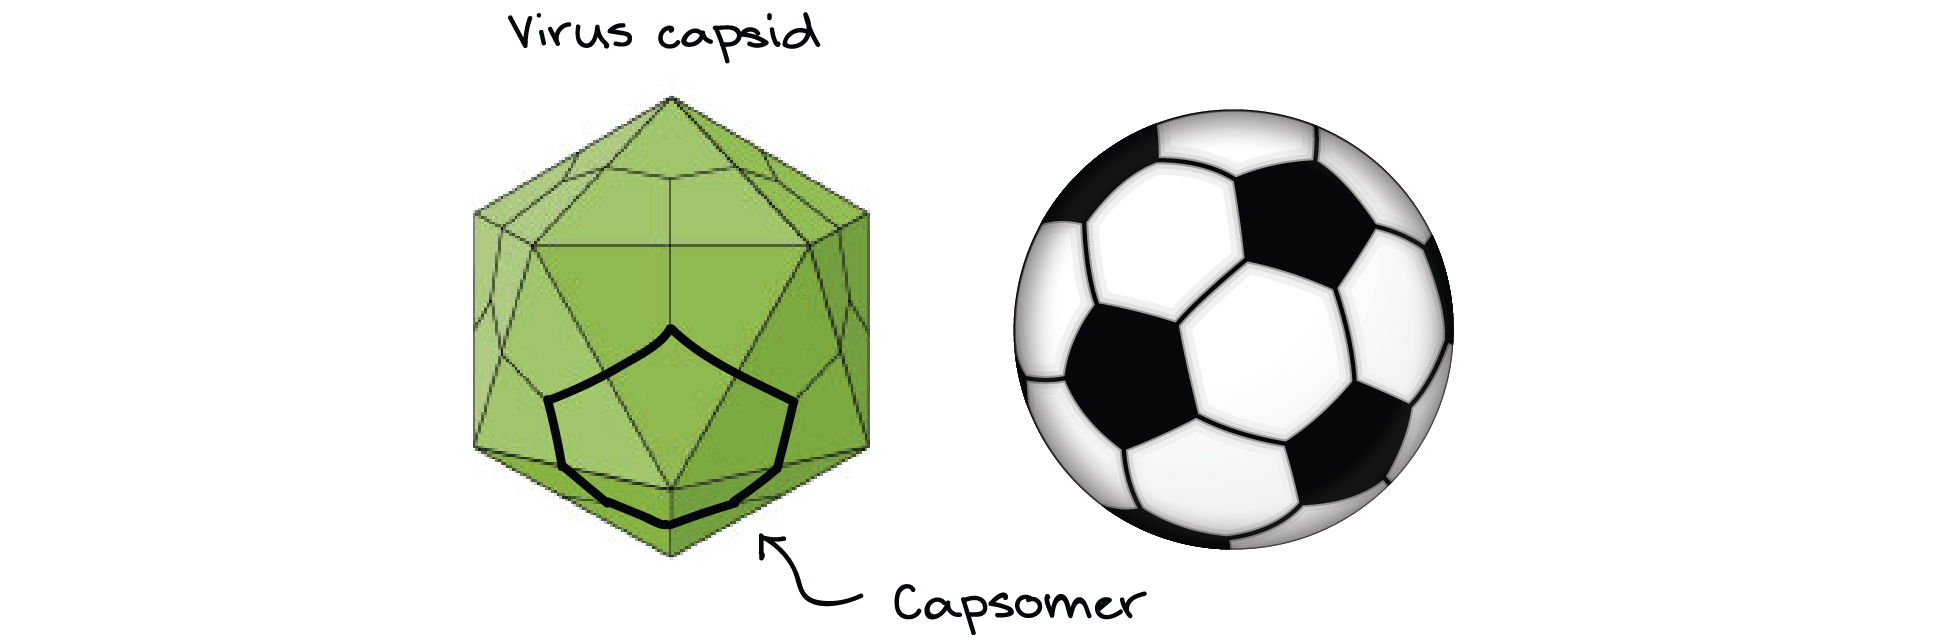 Comparison of a soccer ball with a virus capsid. The hexagons are one type of capsomer while the pentagon are another type. Both types of capsomer are assembled from individual virus proteins.